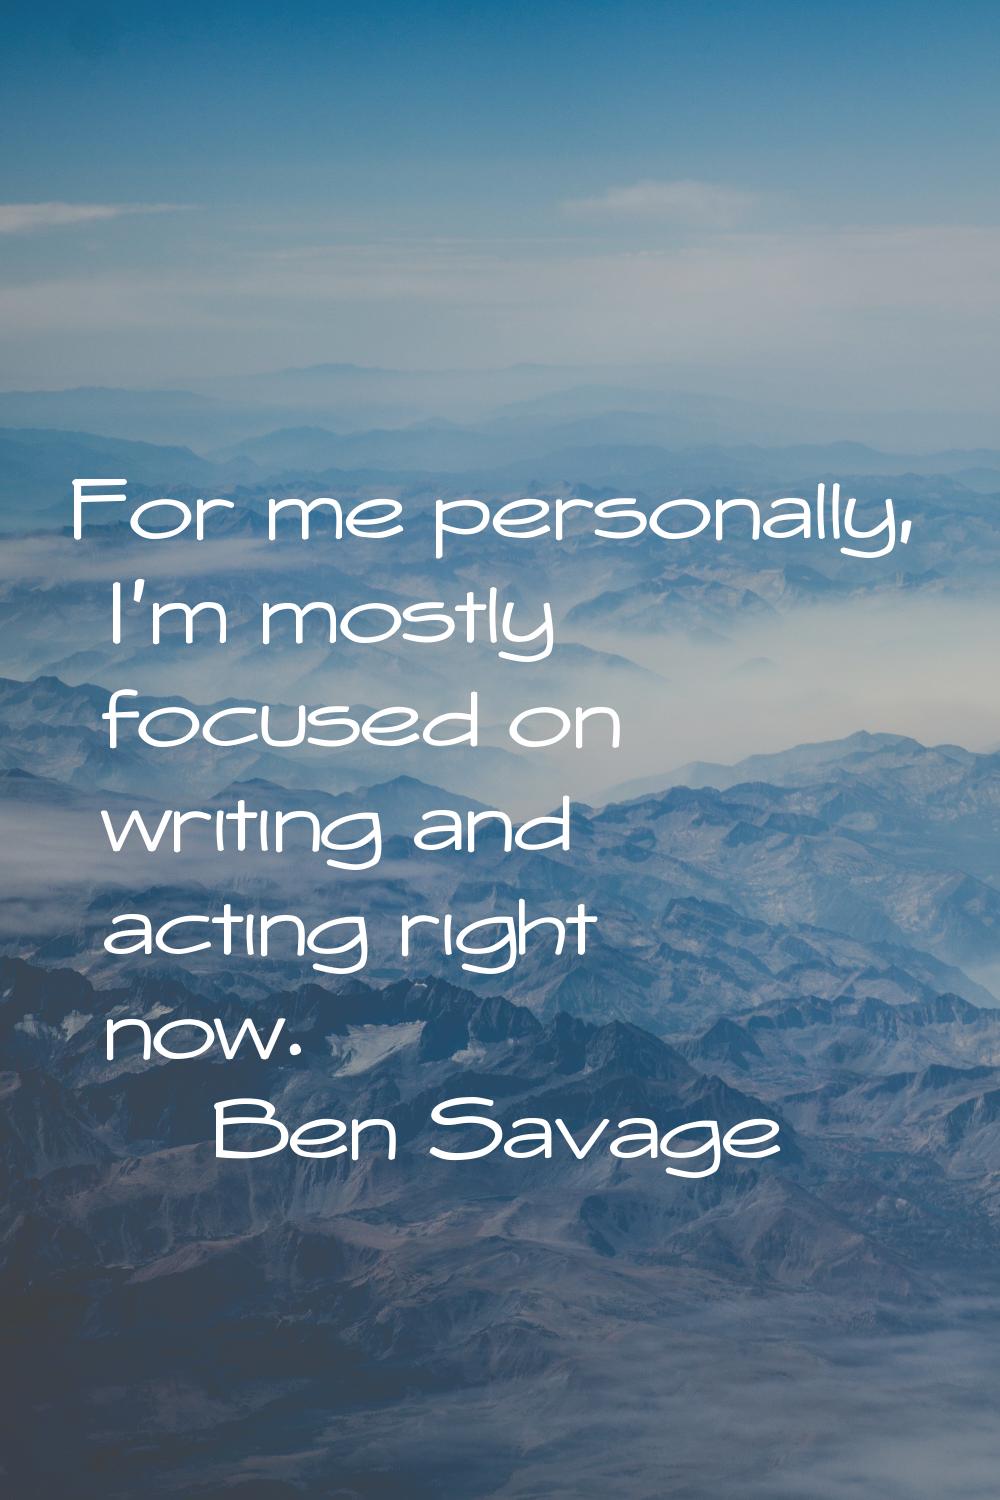 For me personally, I'm mostly focused on writing and acting right now.